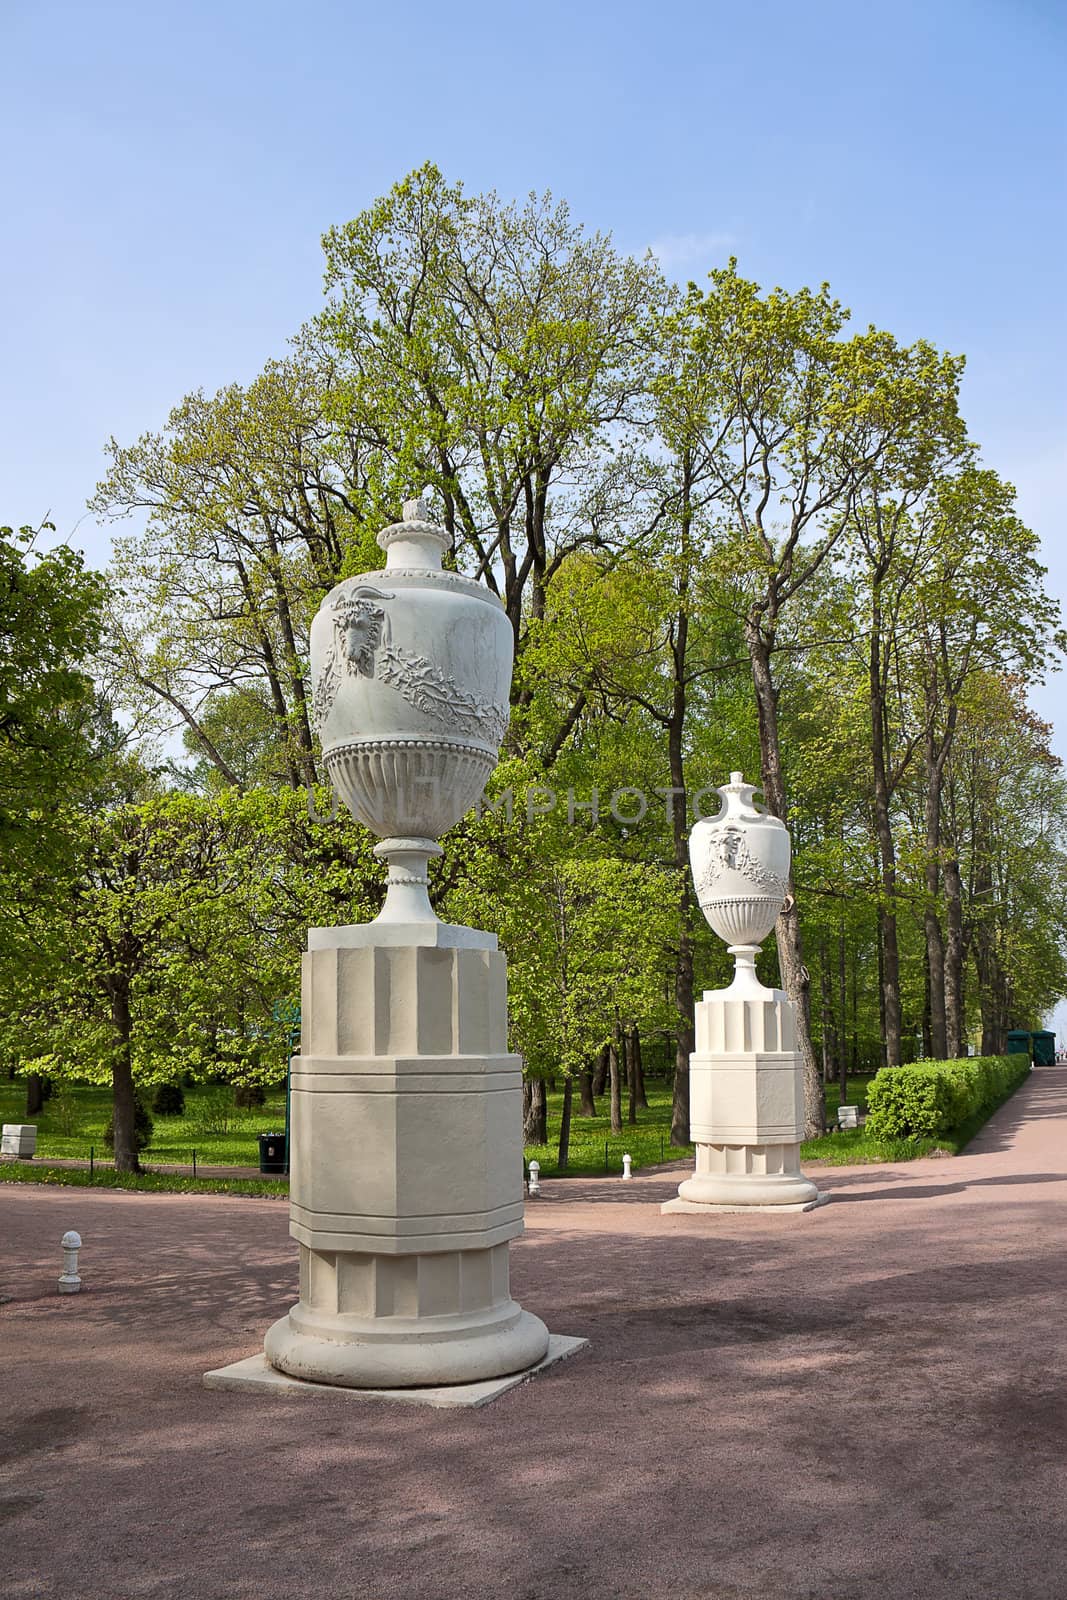 sculptured vases in Lower Park by zhannaprokopeva